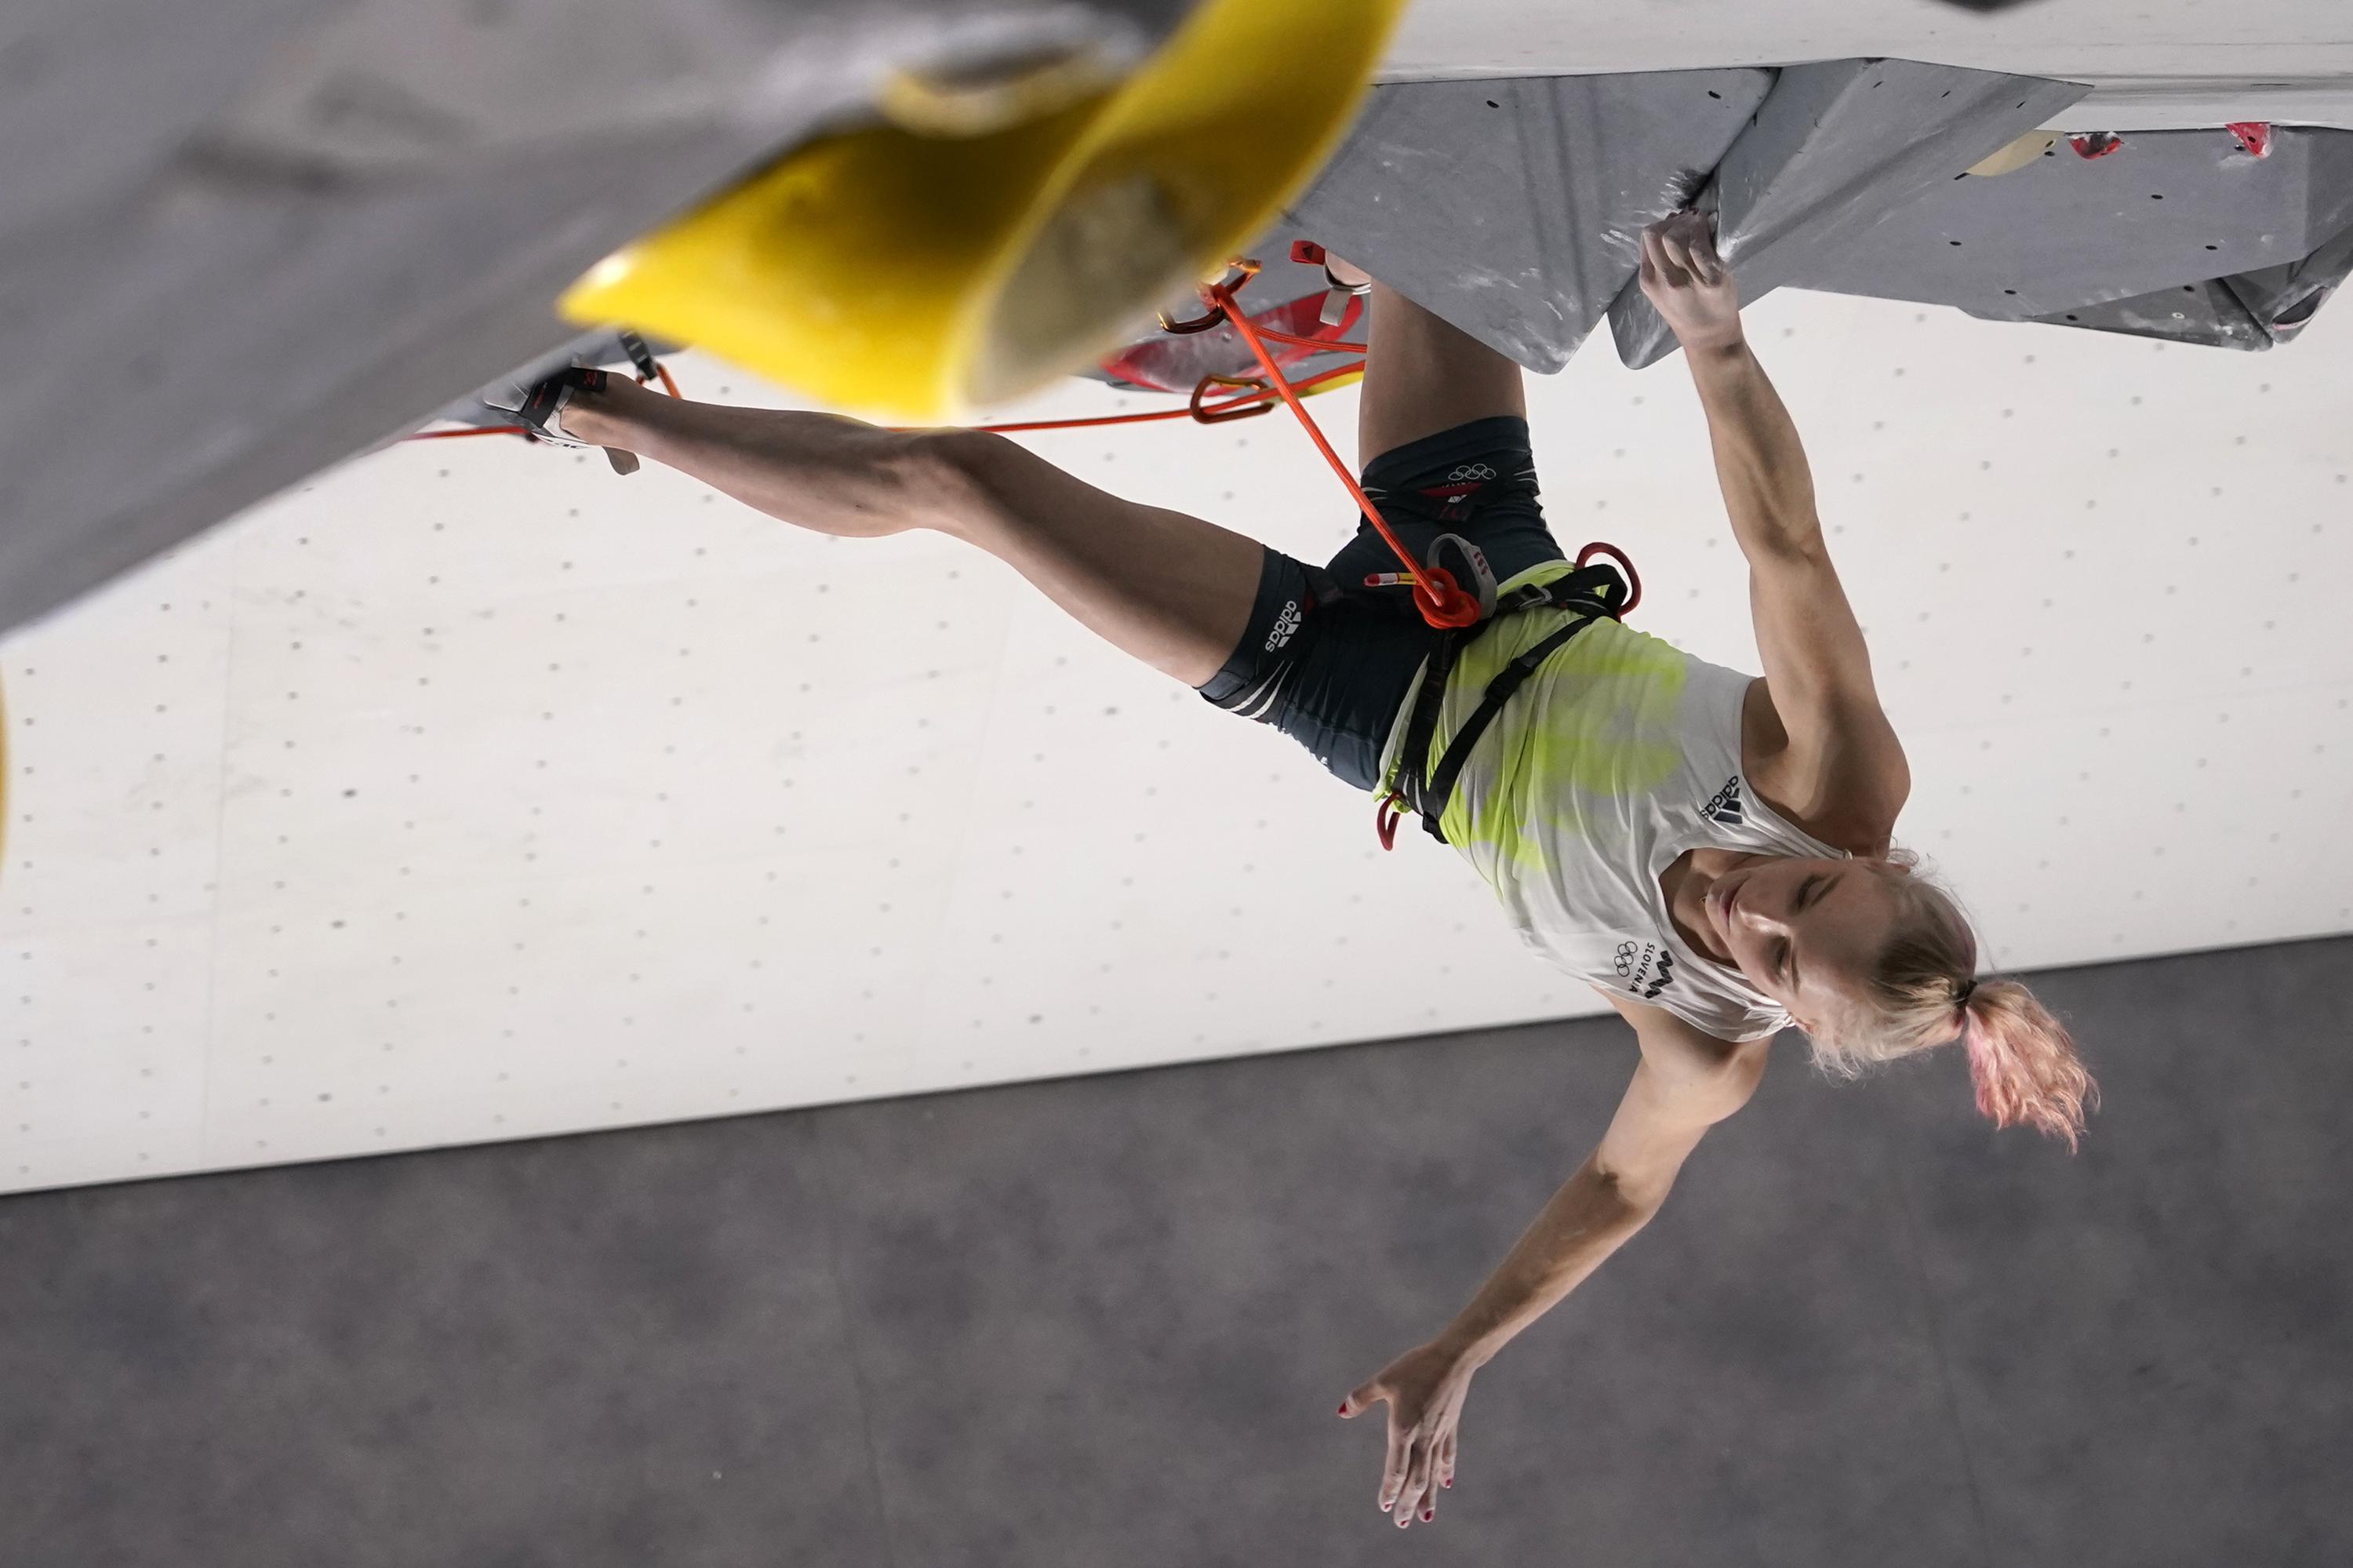 EXPLAINER How sport climbing reached the Olympics AP News